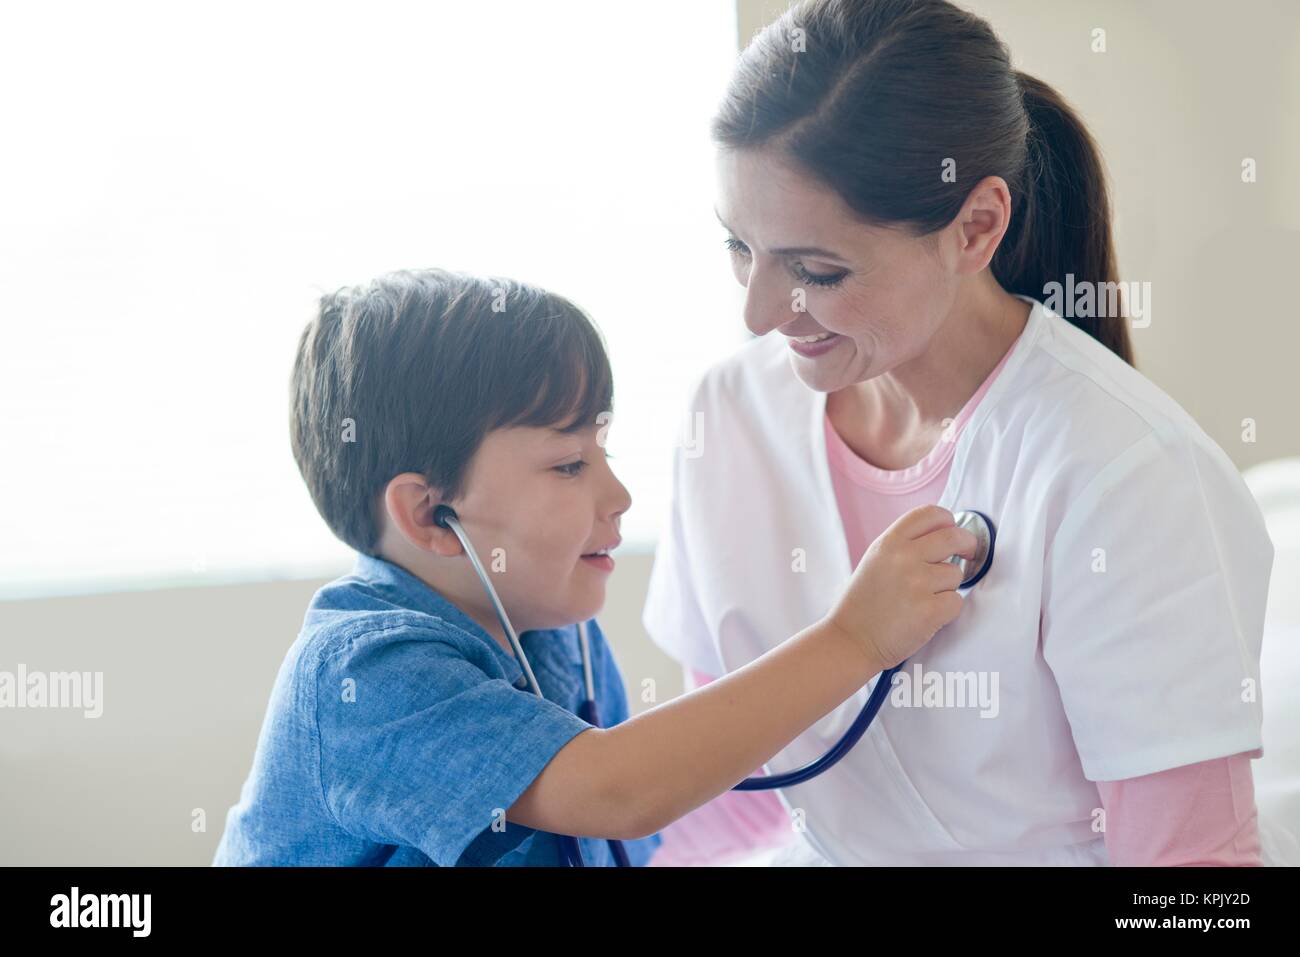 Young boy and nurse playing with stethoscope. Stock Photo